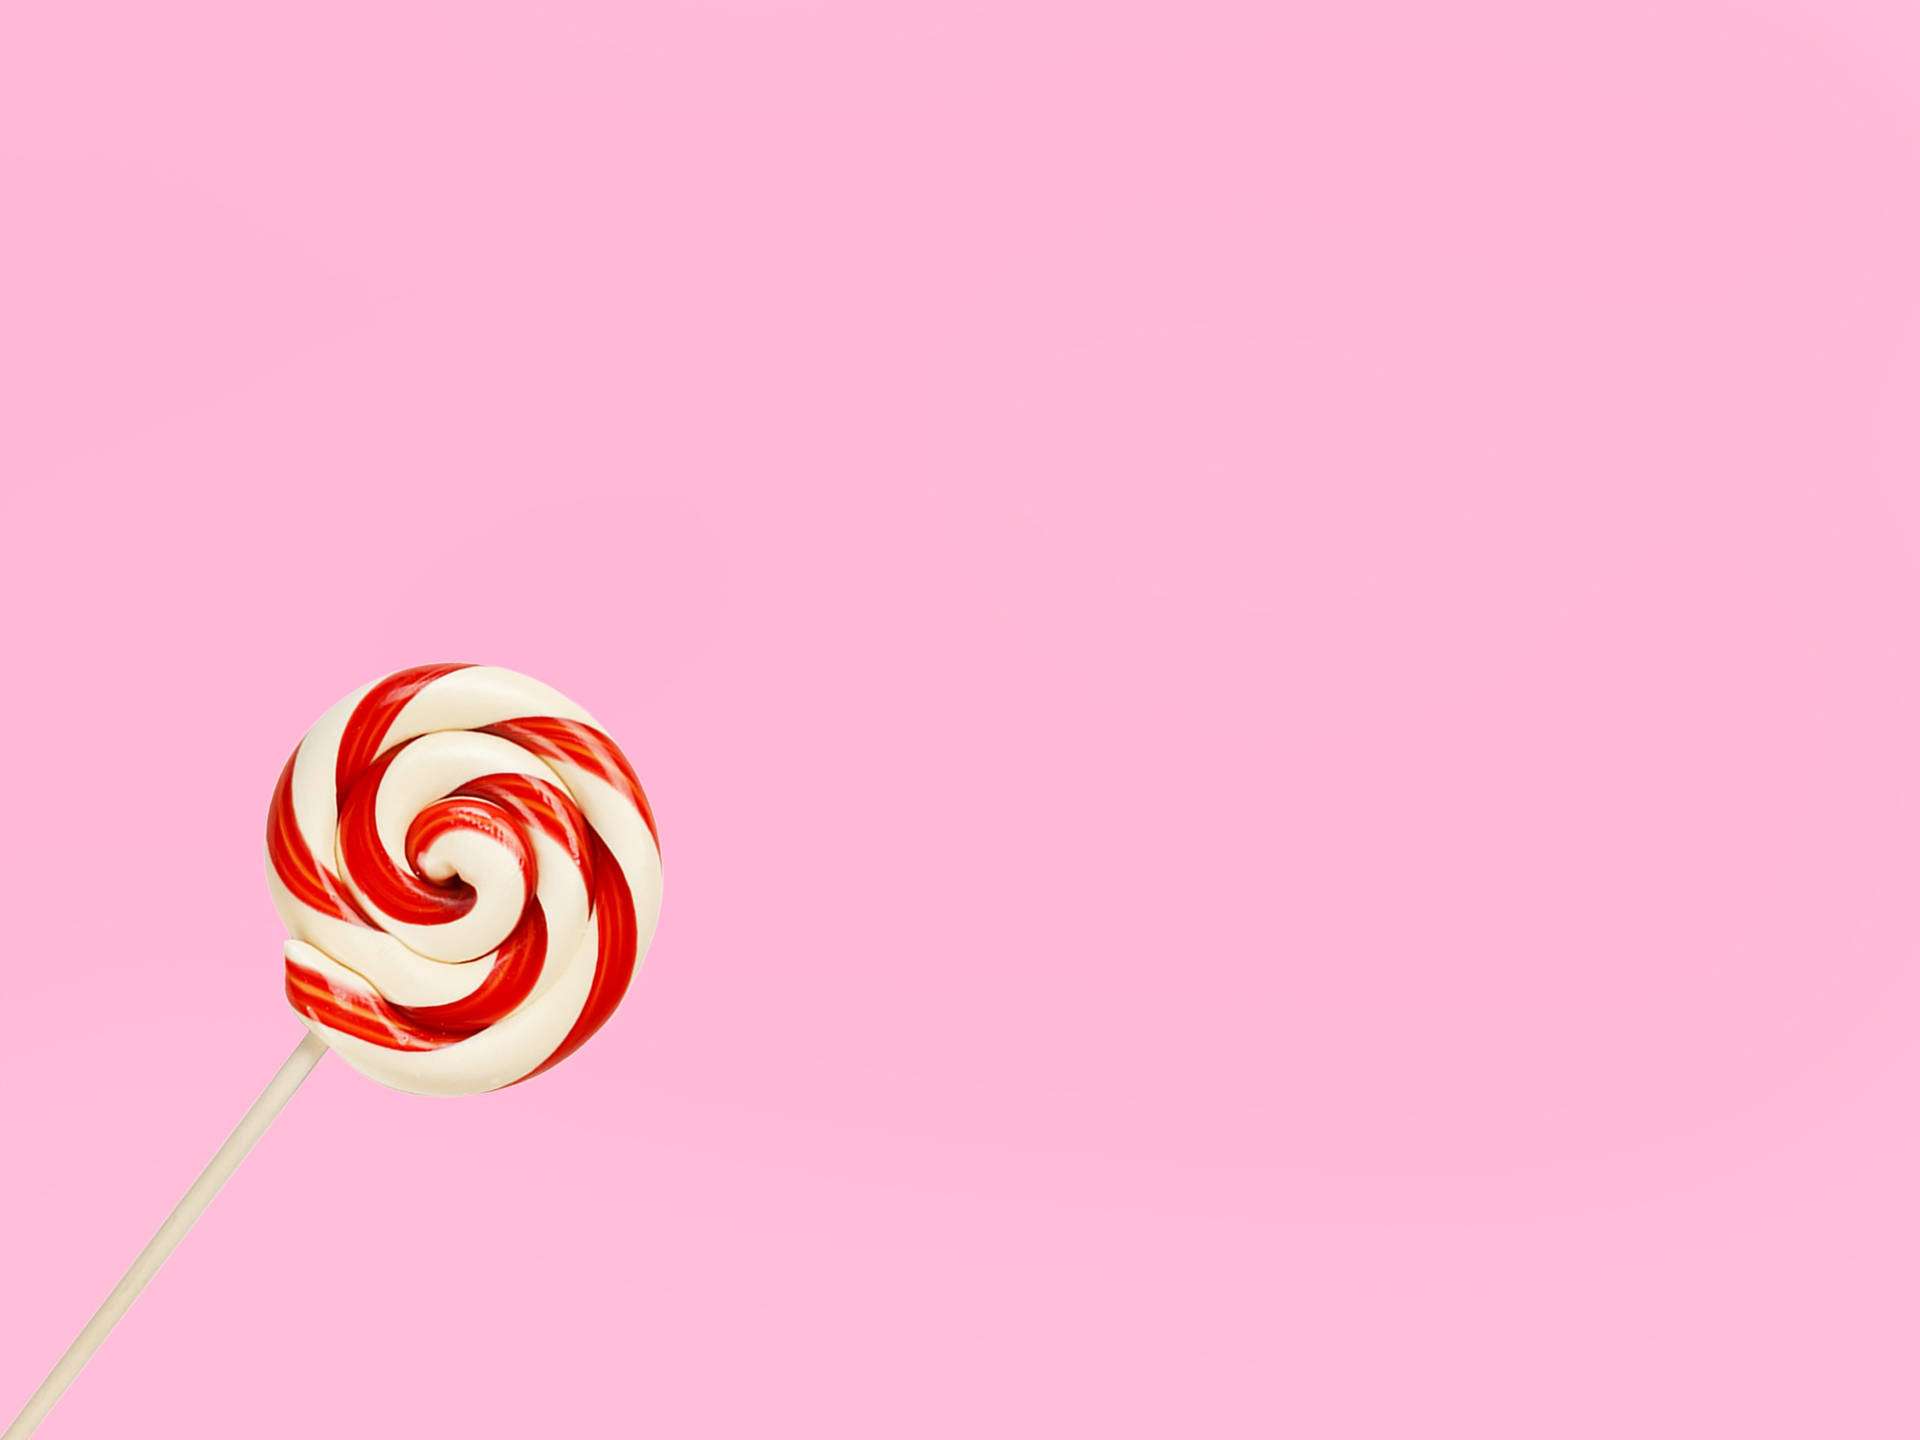 Red And White Lollipop On Pink Background Background